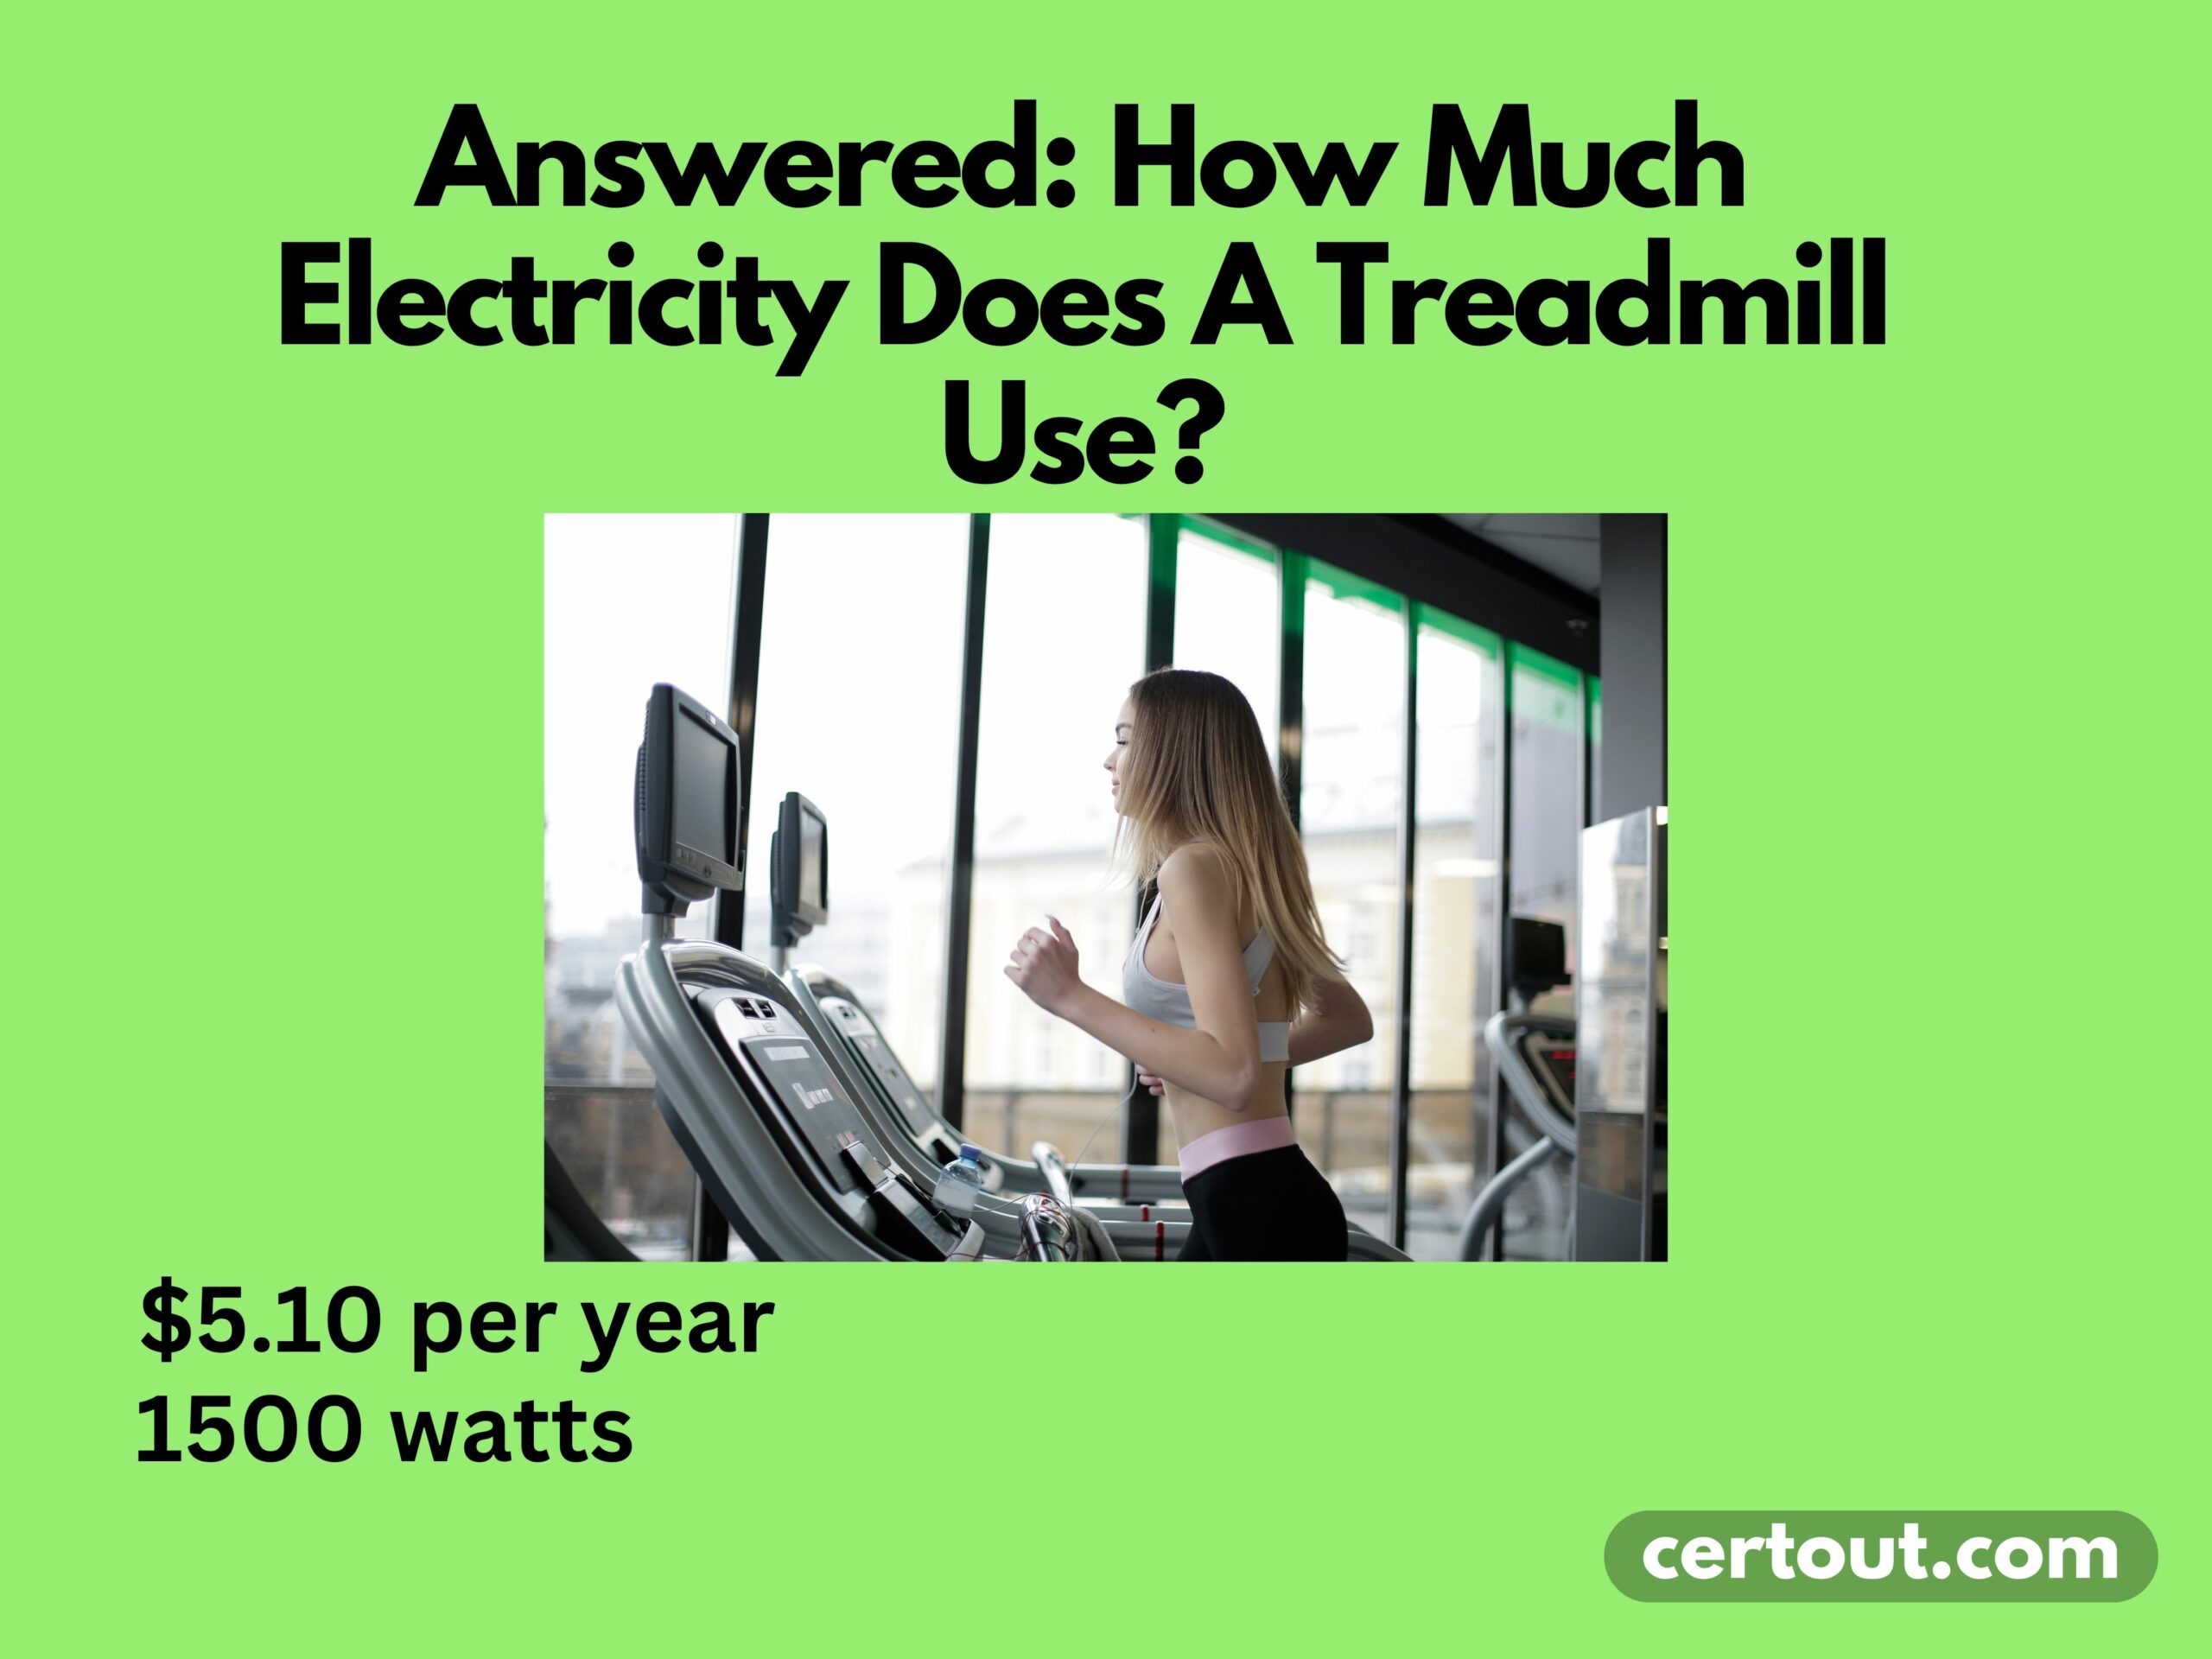 Electricity Does A Treadmill Use